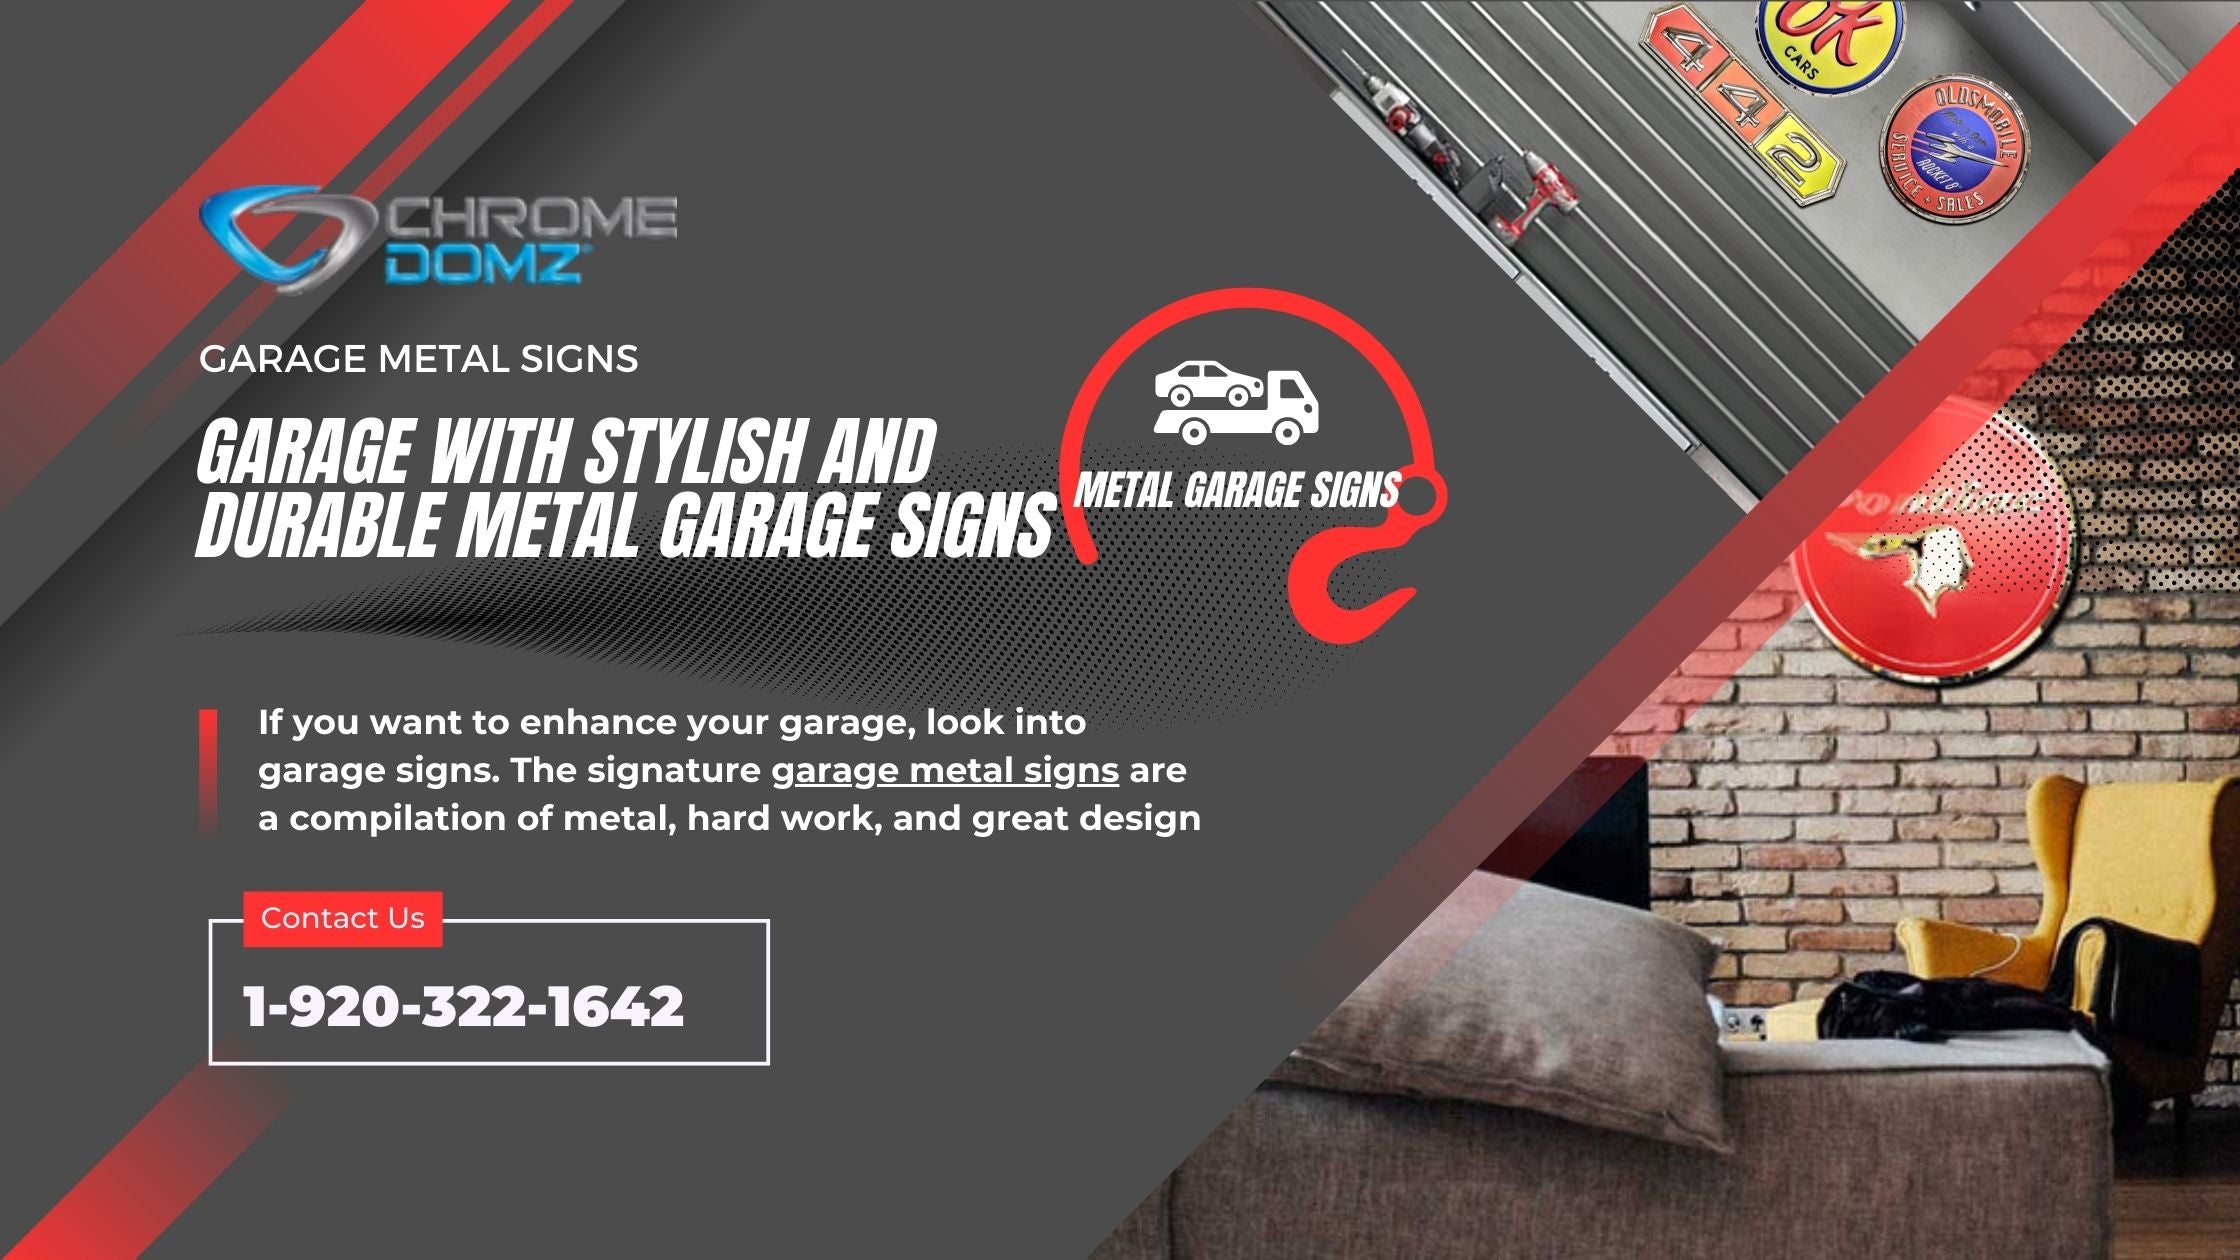 Enhance Your Garage with Stylish and Durable Metal Garage Signs